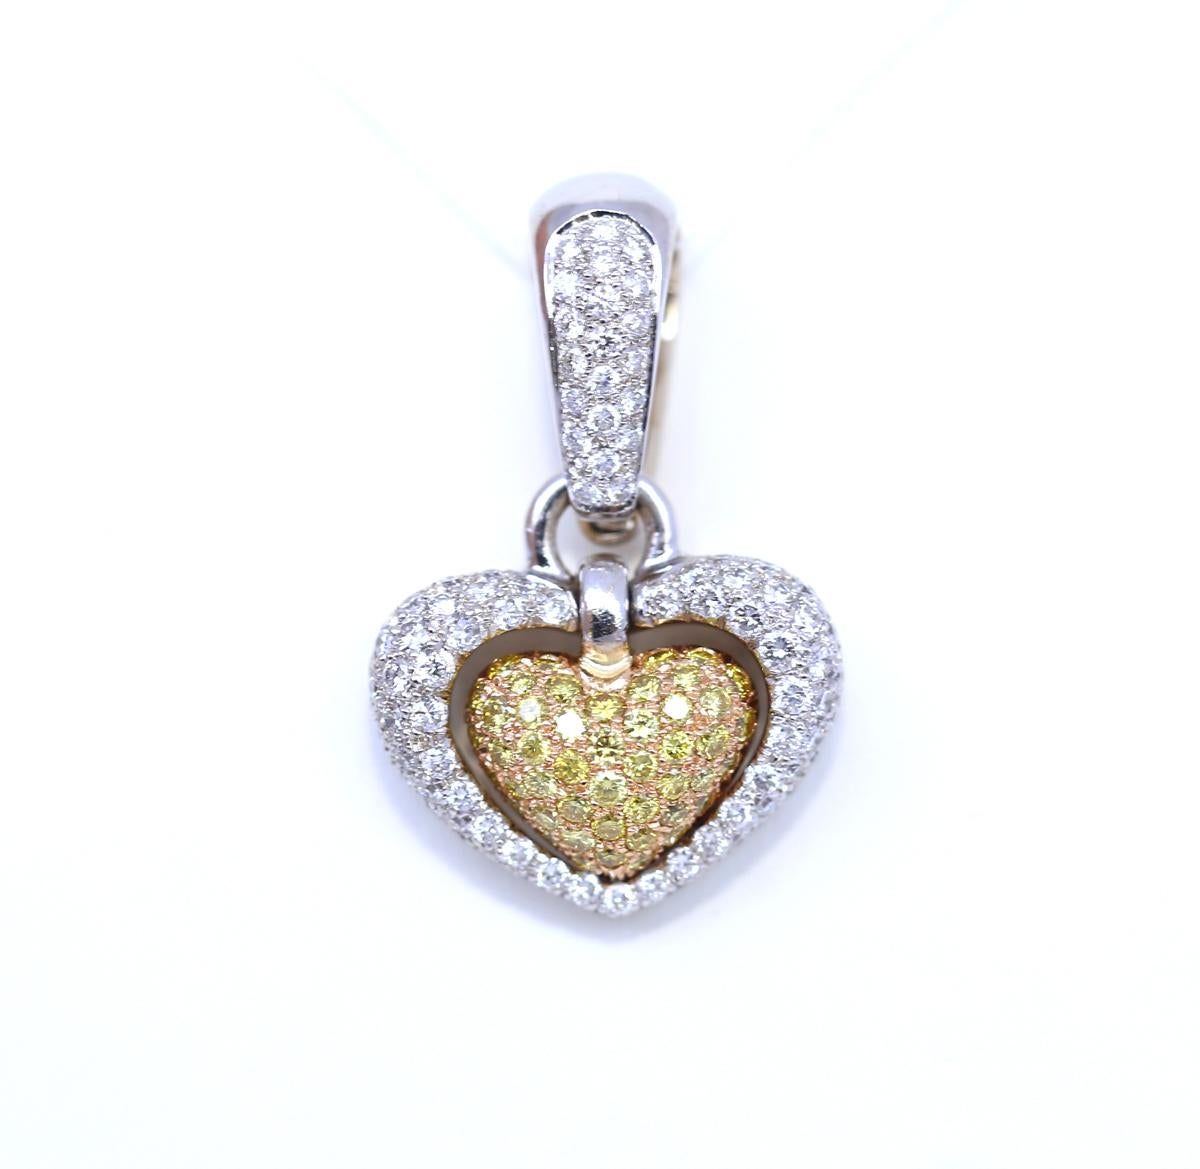 Fancy Yellow and White Diamonds Heart-shaped Pendant, Italy. 18 Karat White Gold.
Fancy Yellow Diamonds forming a shape of a heart is set freely within a bigger heart shape with fine white Diamonds. A heart within a heart moves freely with the